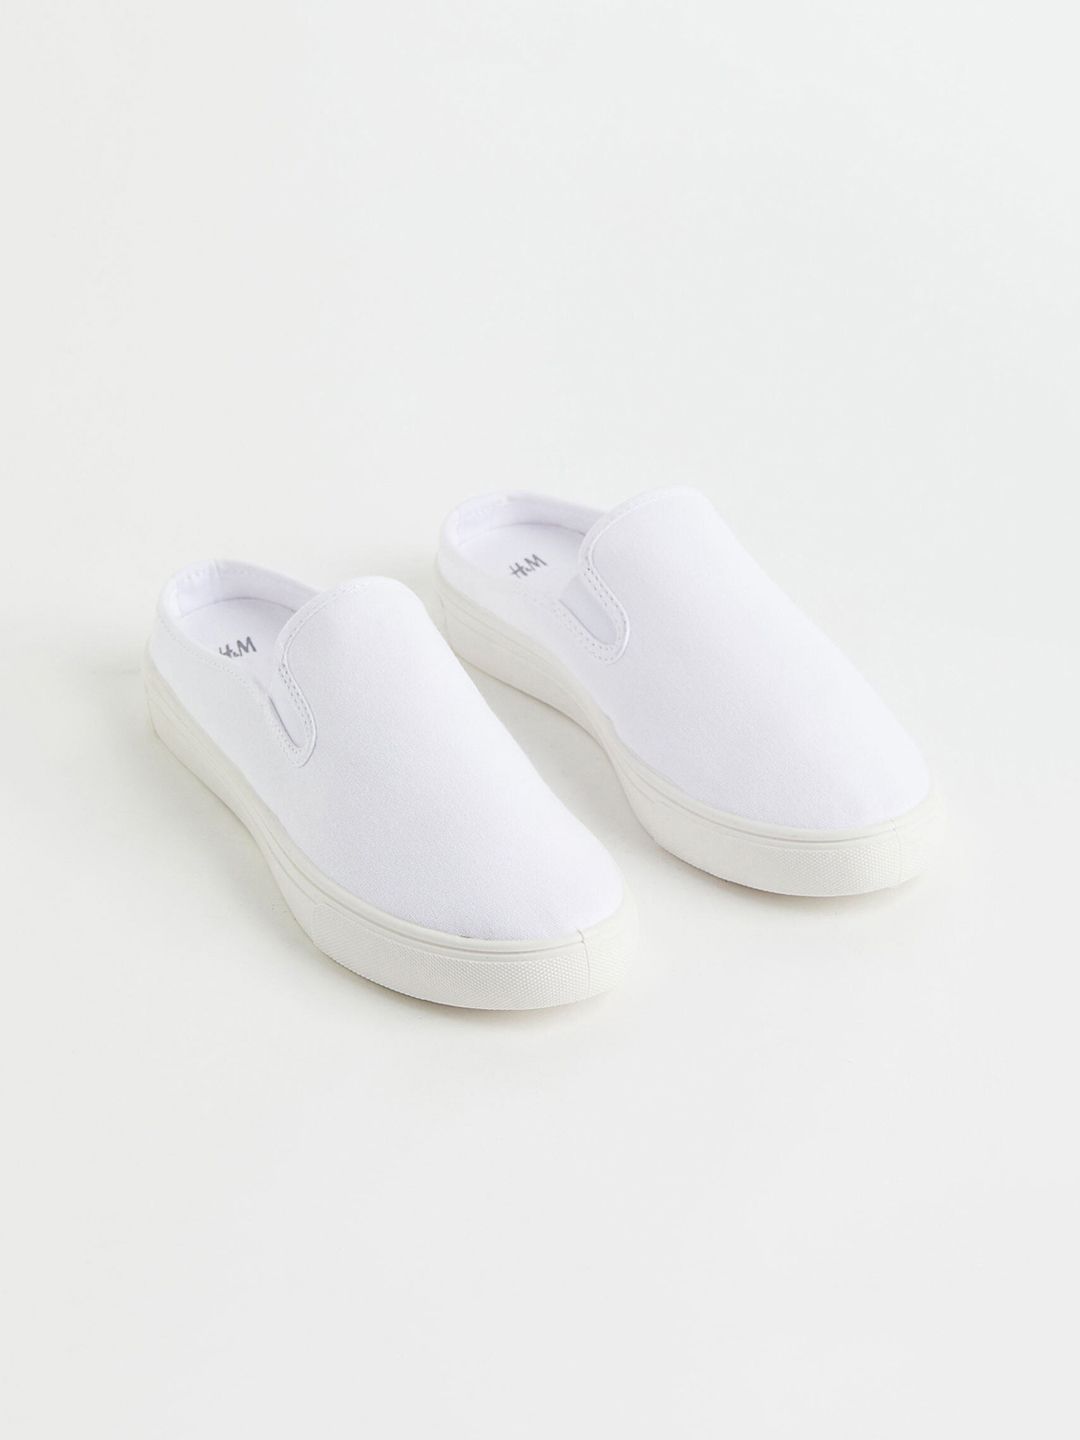 H&M Women White Slip-on Trainers Price in India